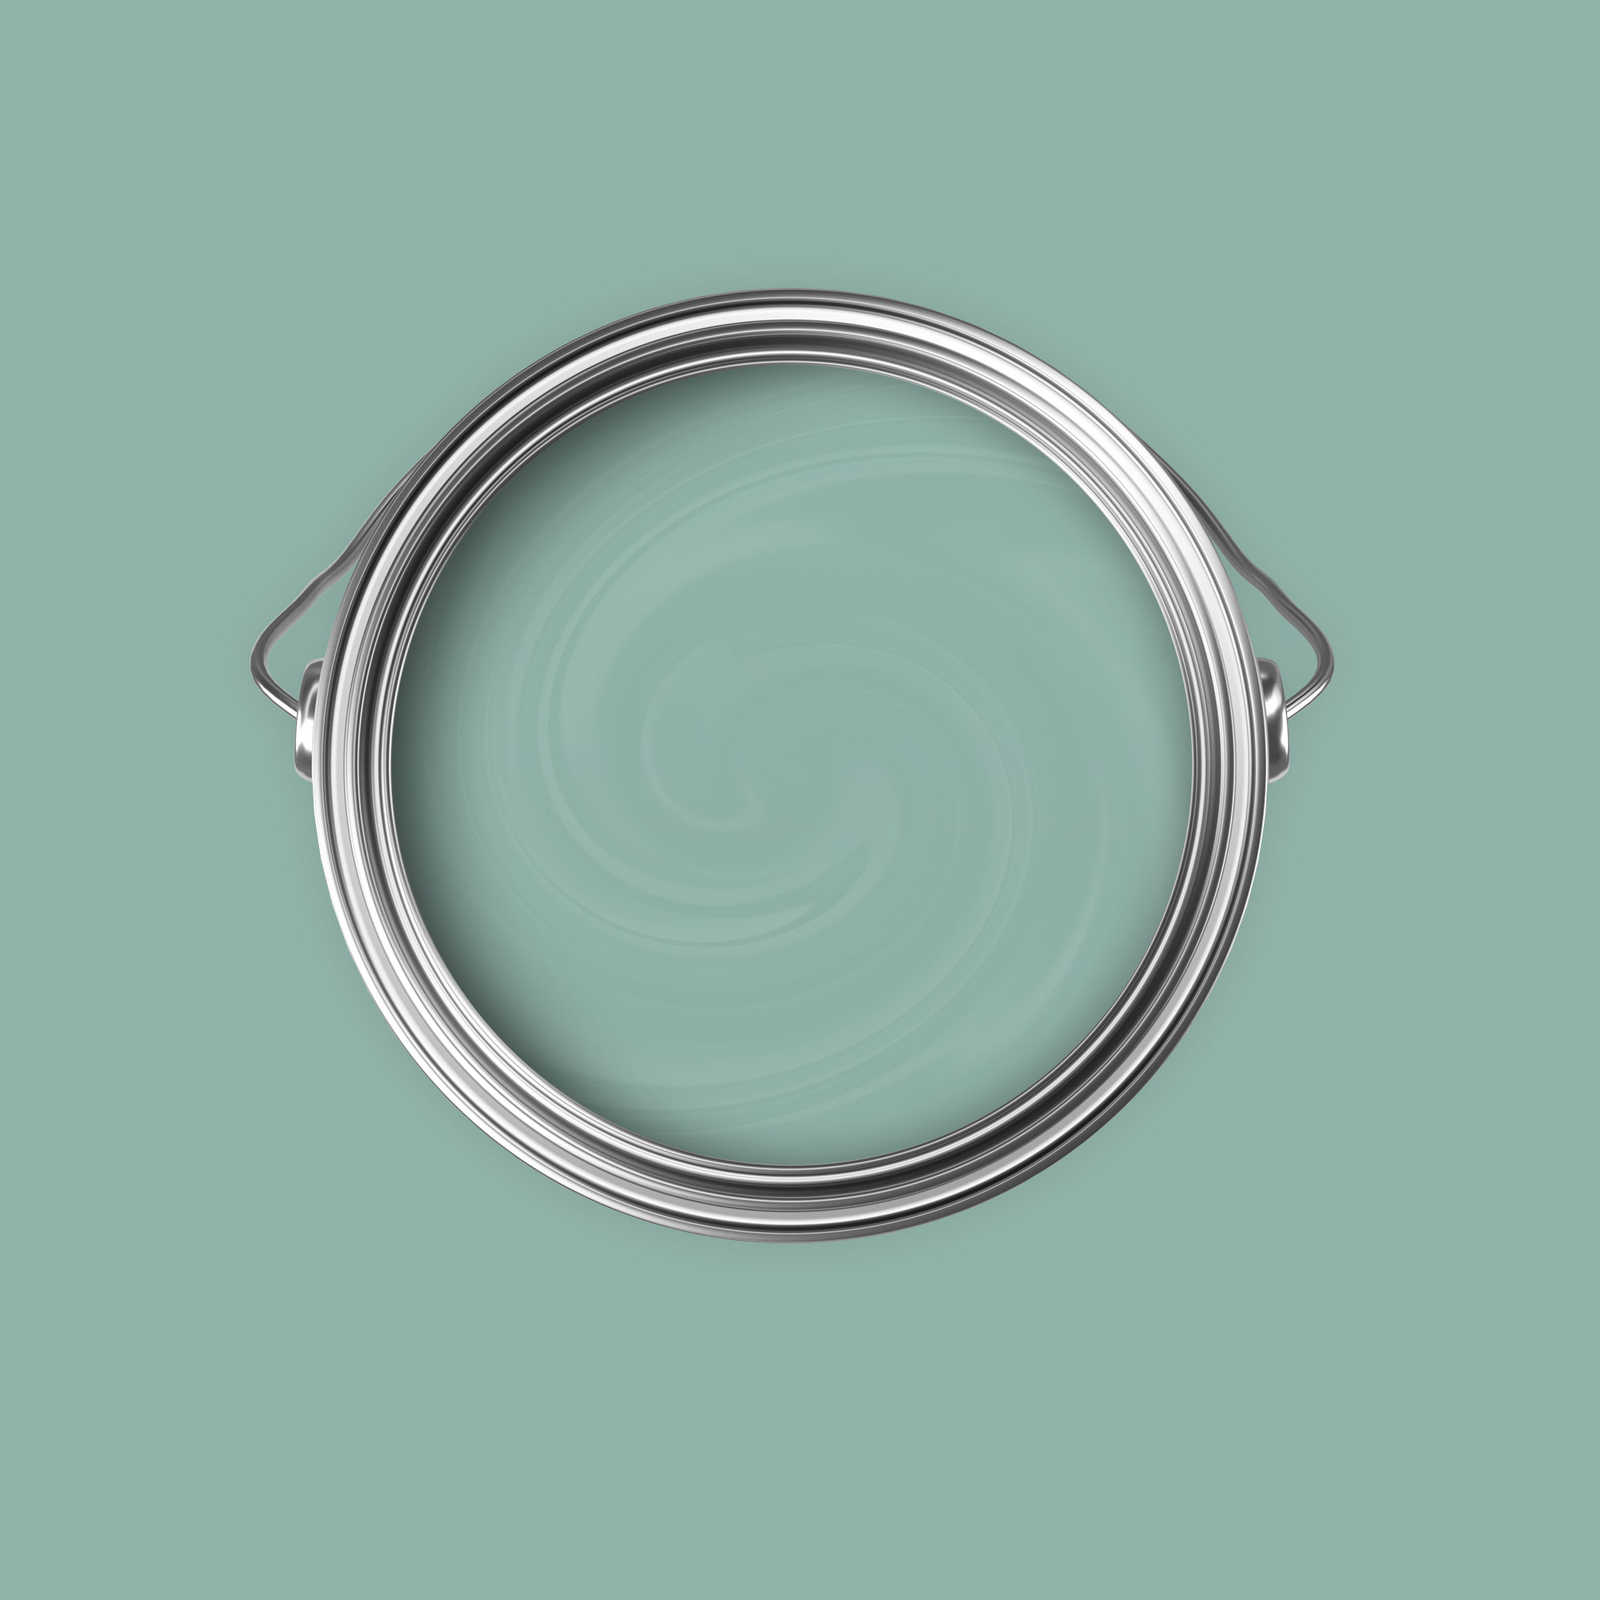             Premium Wall Paint Friendly Jade Green »Sweet Sage« NW402 – 5 litre
        